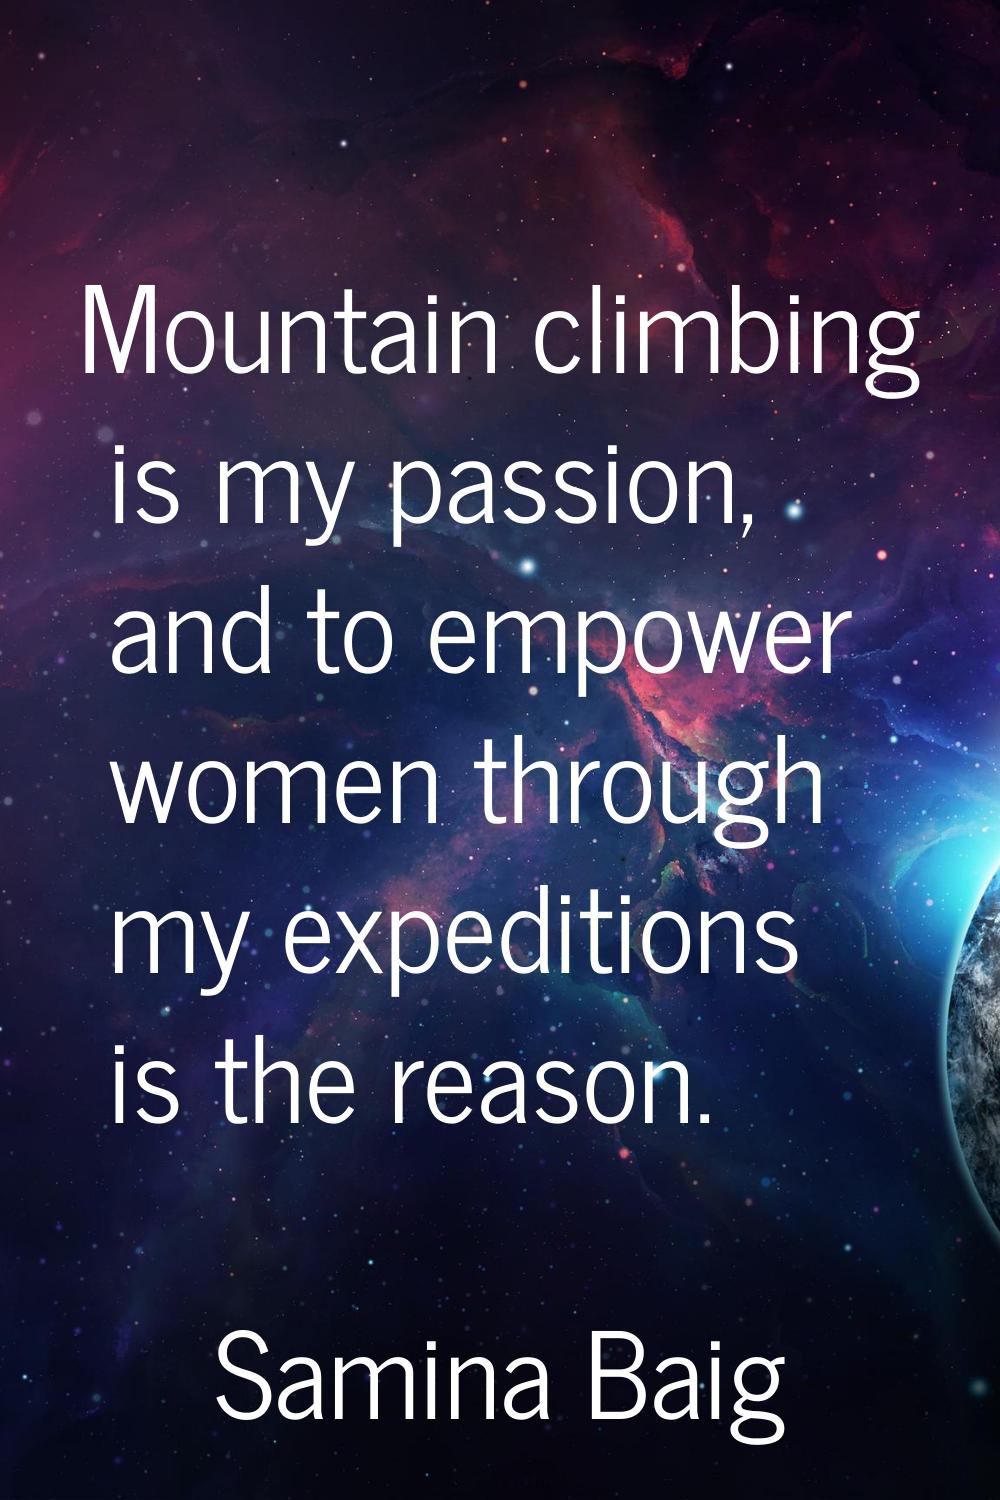 Mountain climbing is my passion, and to empower women through my expeditions is the reason.